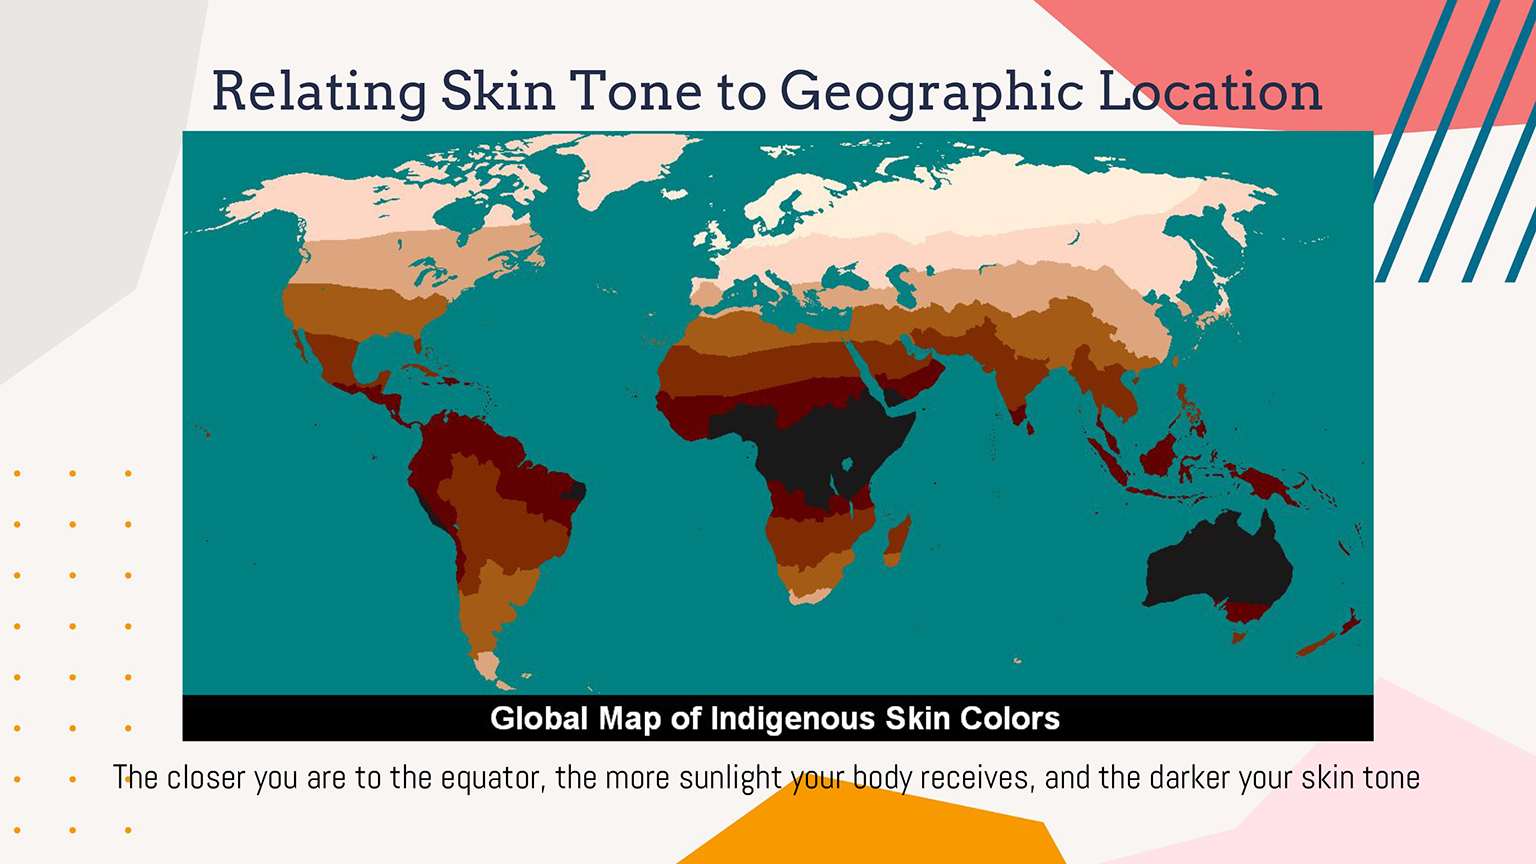 A slide from a lesson for children, "Why do we have different skin tones?" relating skin tone to geographic regions. The closer to the equator people are, the more sunlight to which they are exposed and the darker their skin tones.